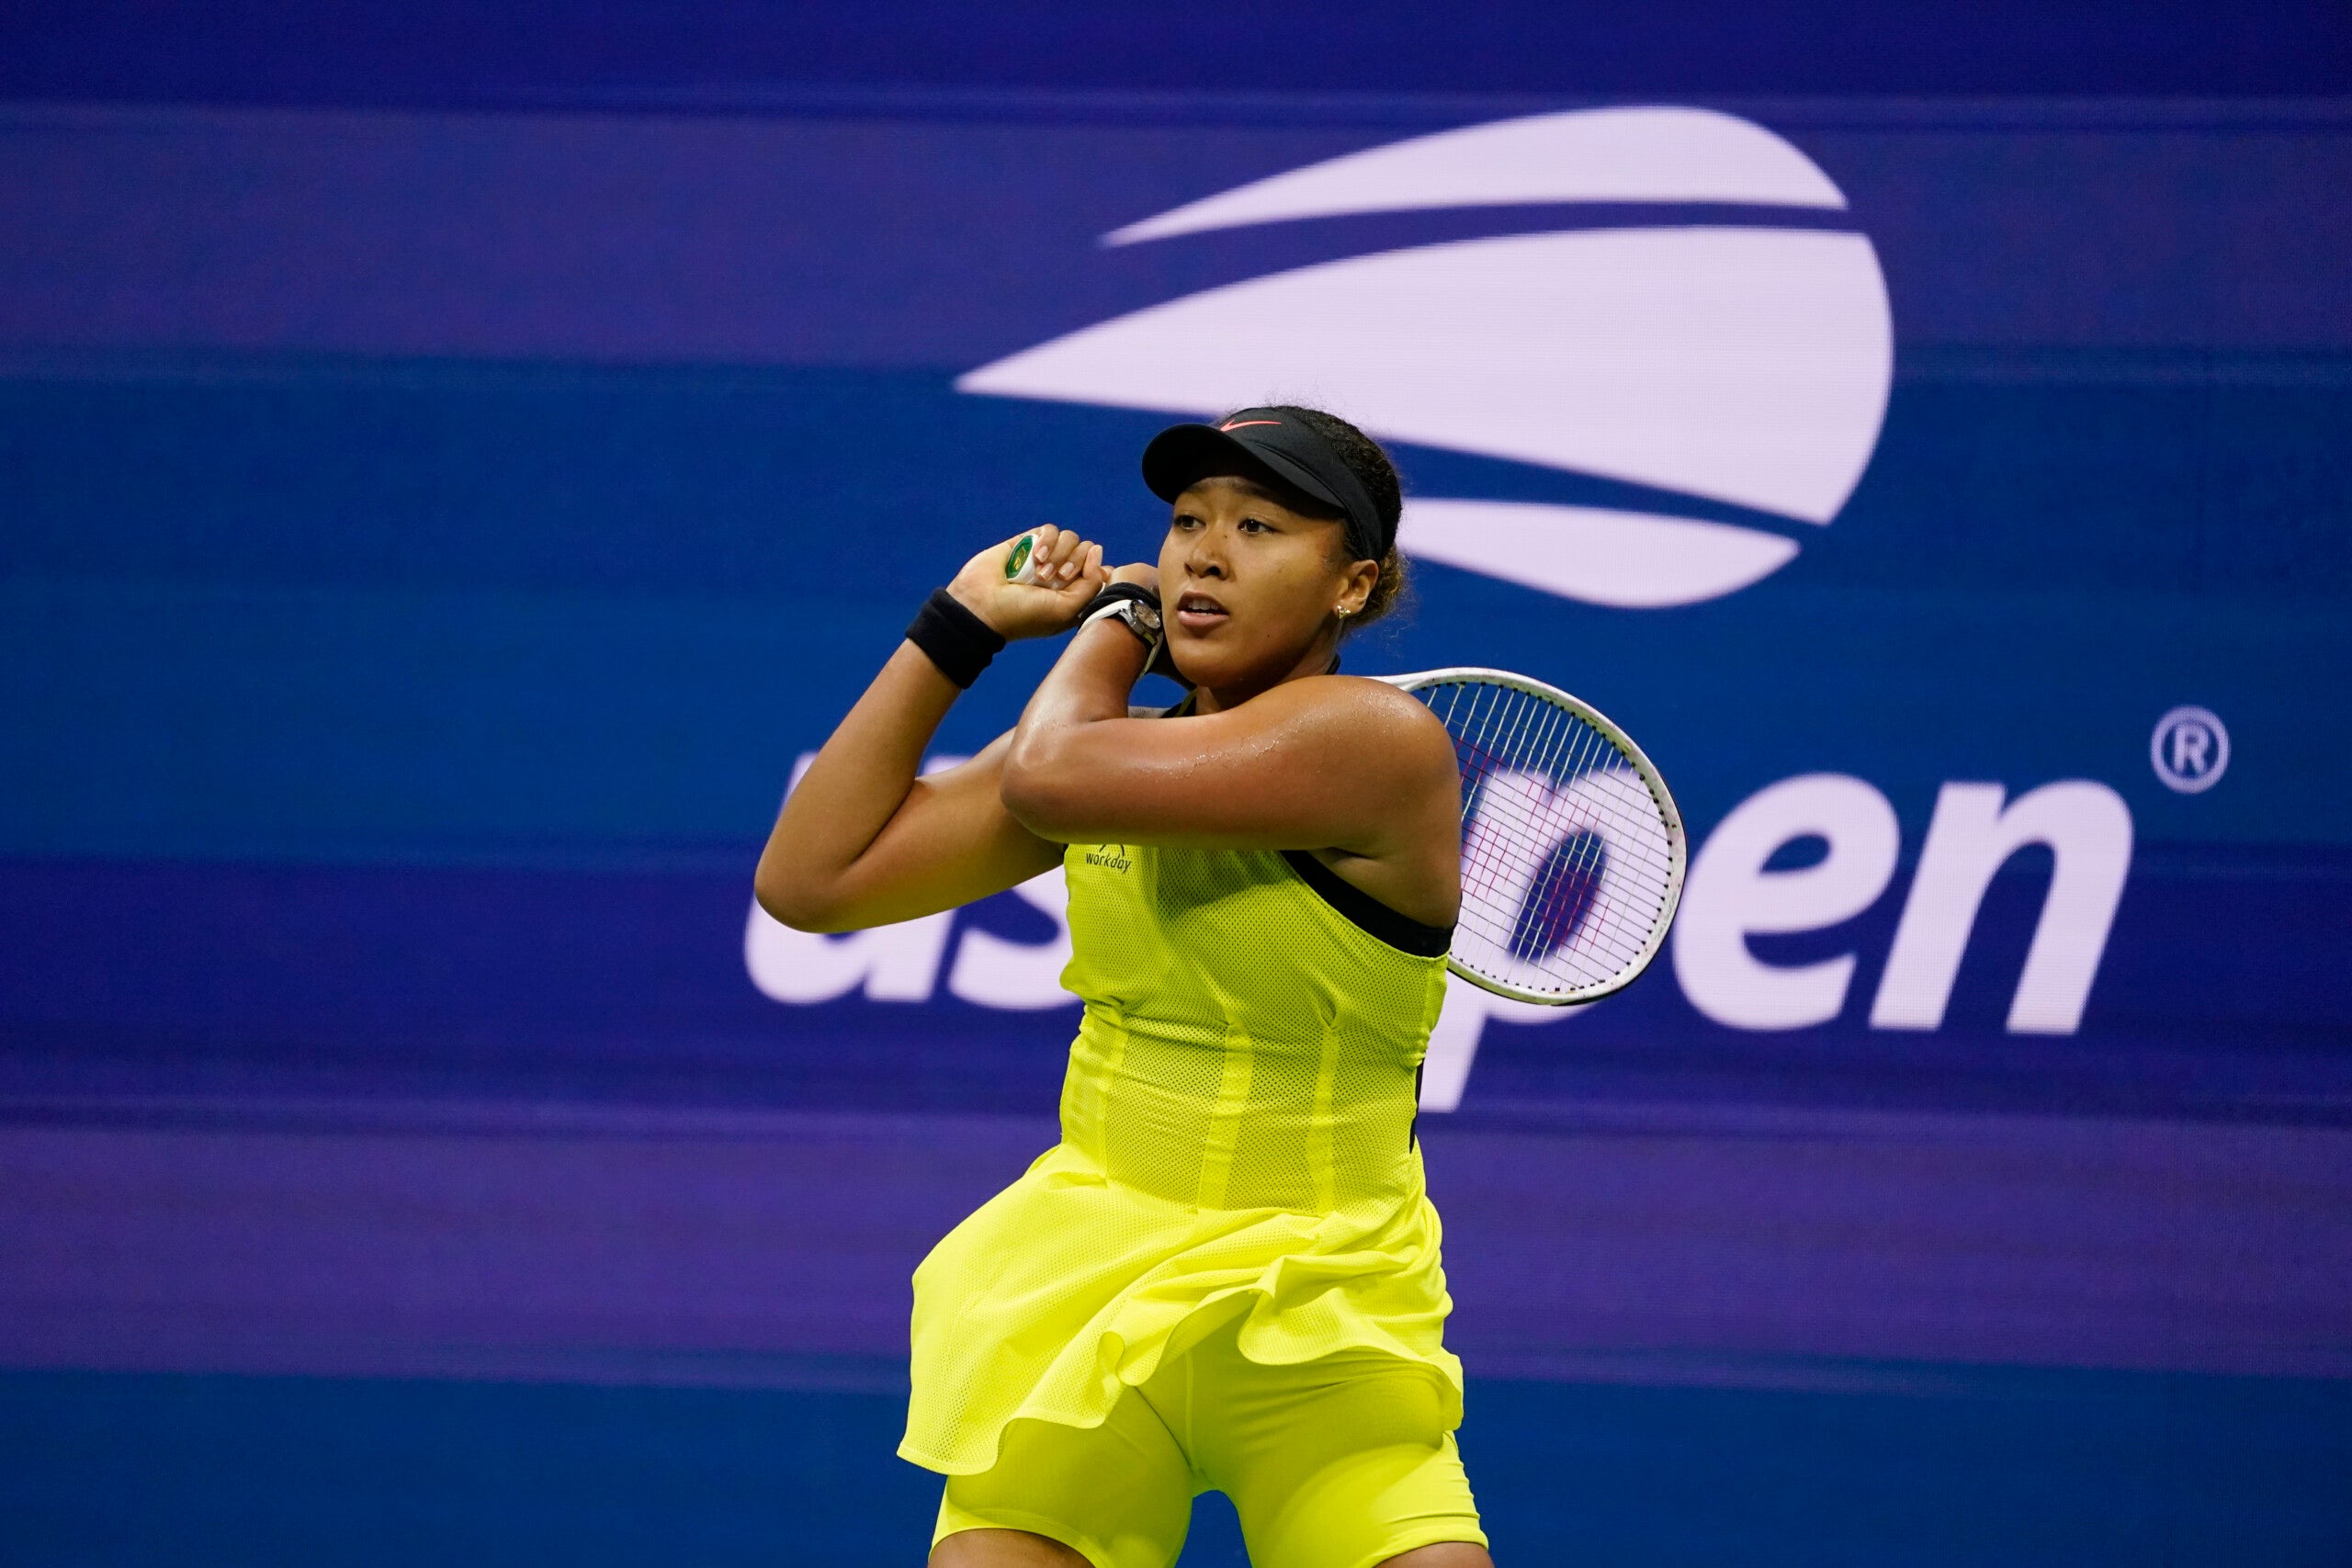 Osaka weighs another break from tennis after US Open loss